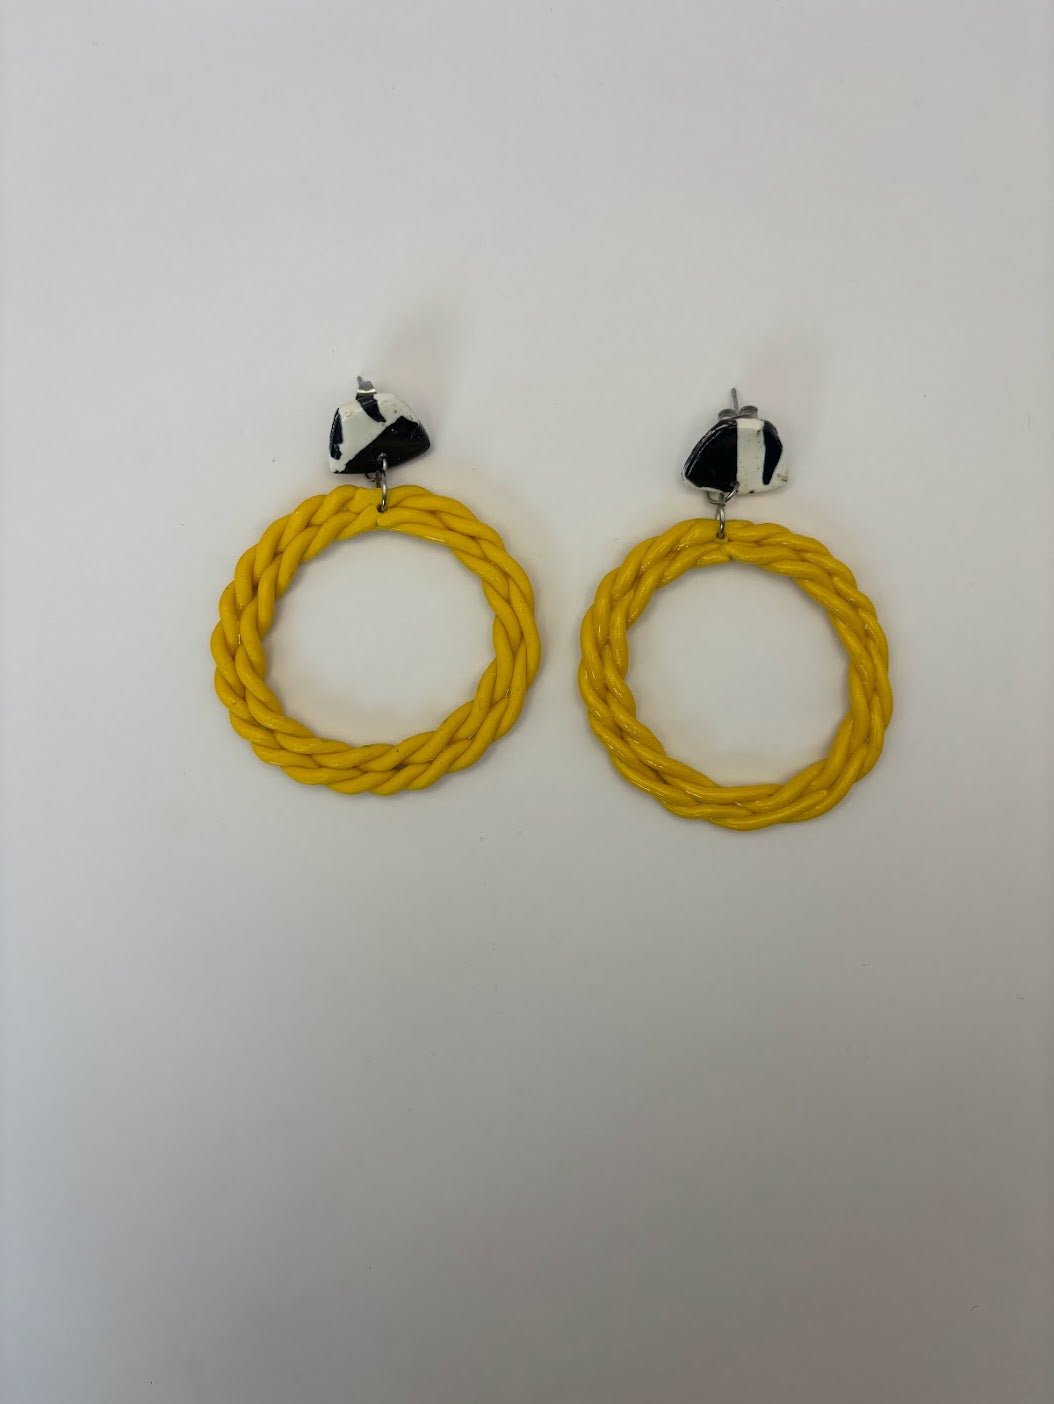 Polymer Clay Earrings - Twisted Yellow Black & White Hoops